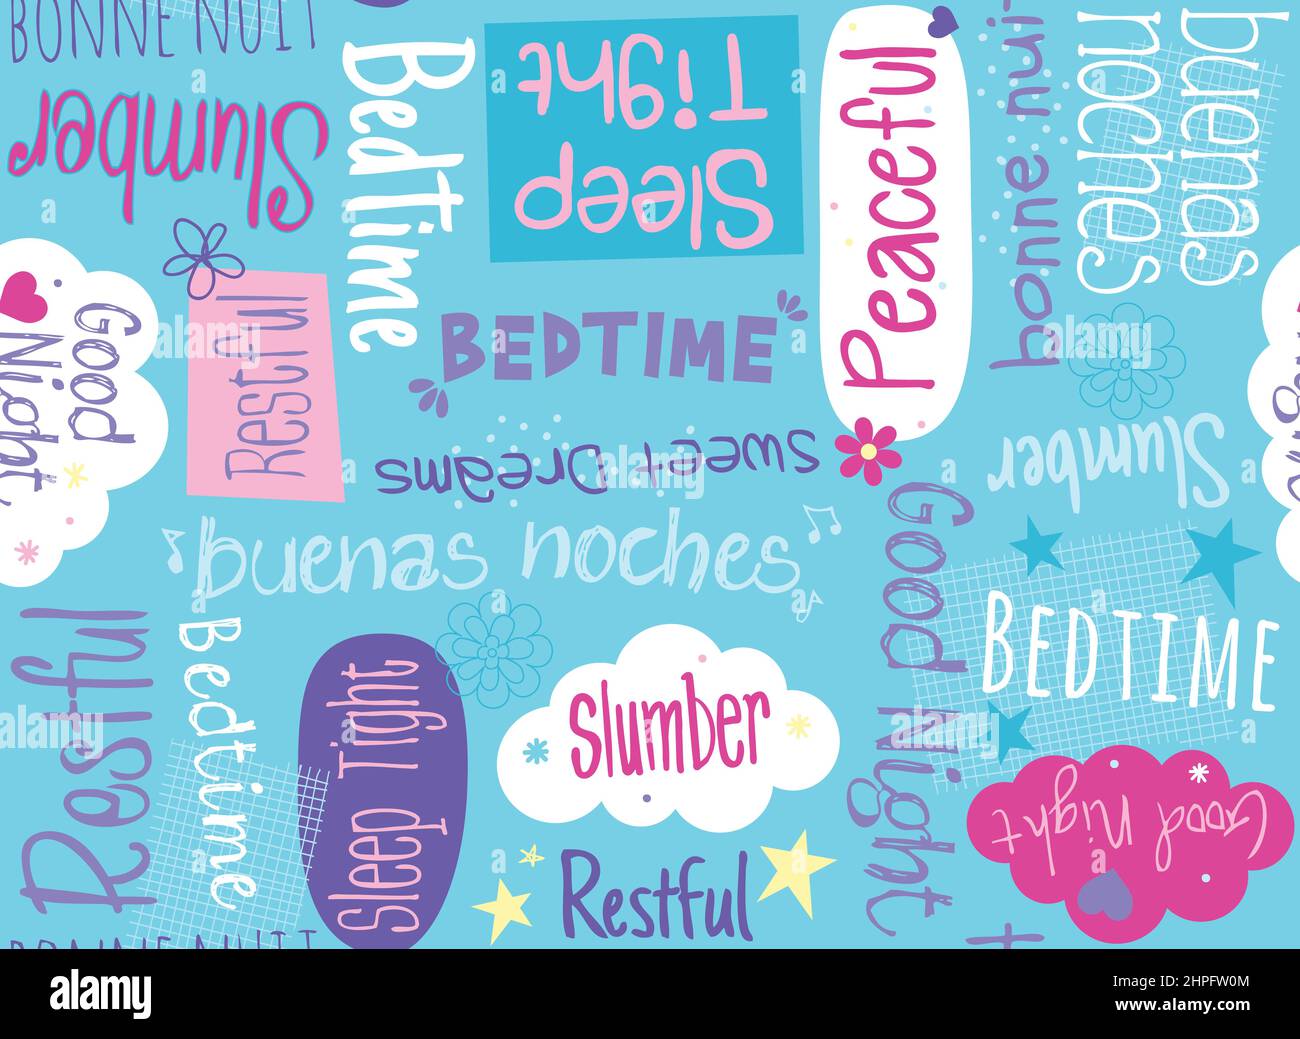 The slumber party Stock Vector Images - Alamy